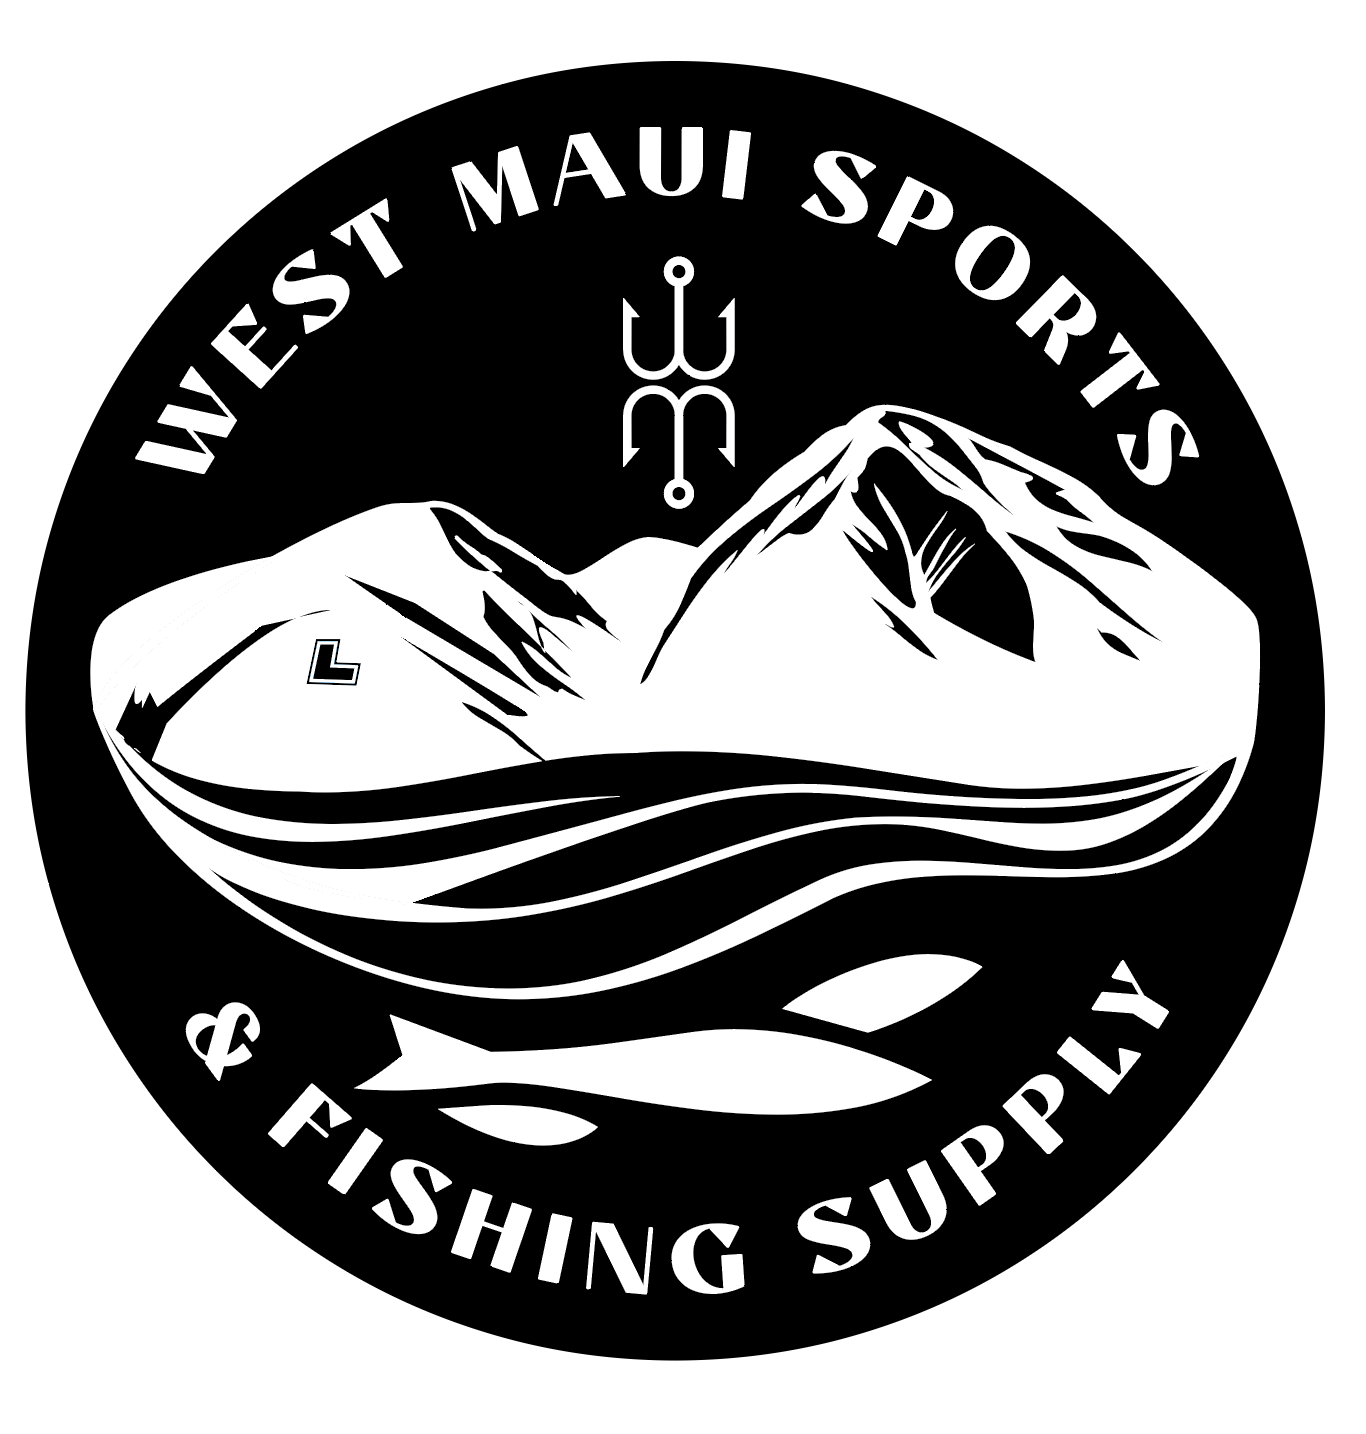 Store — West Maui Sports and Fishing Supply